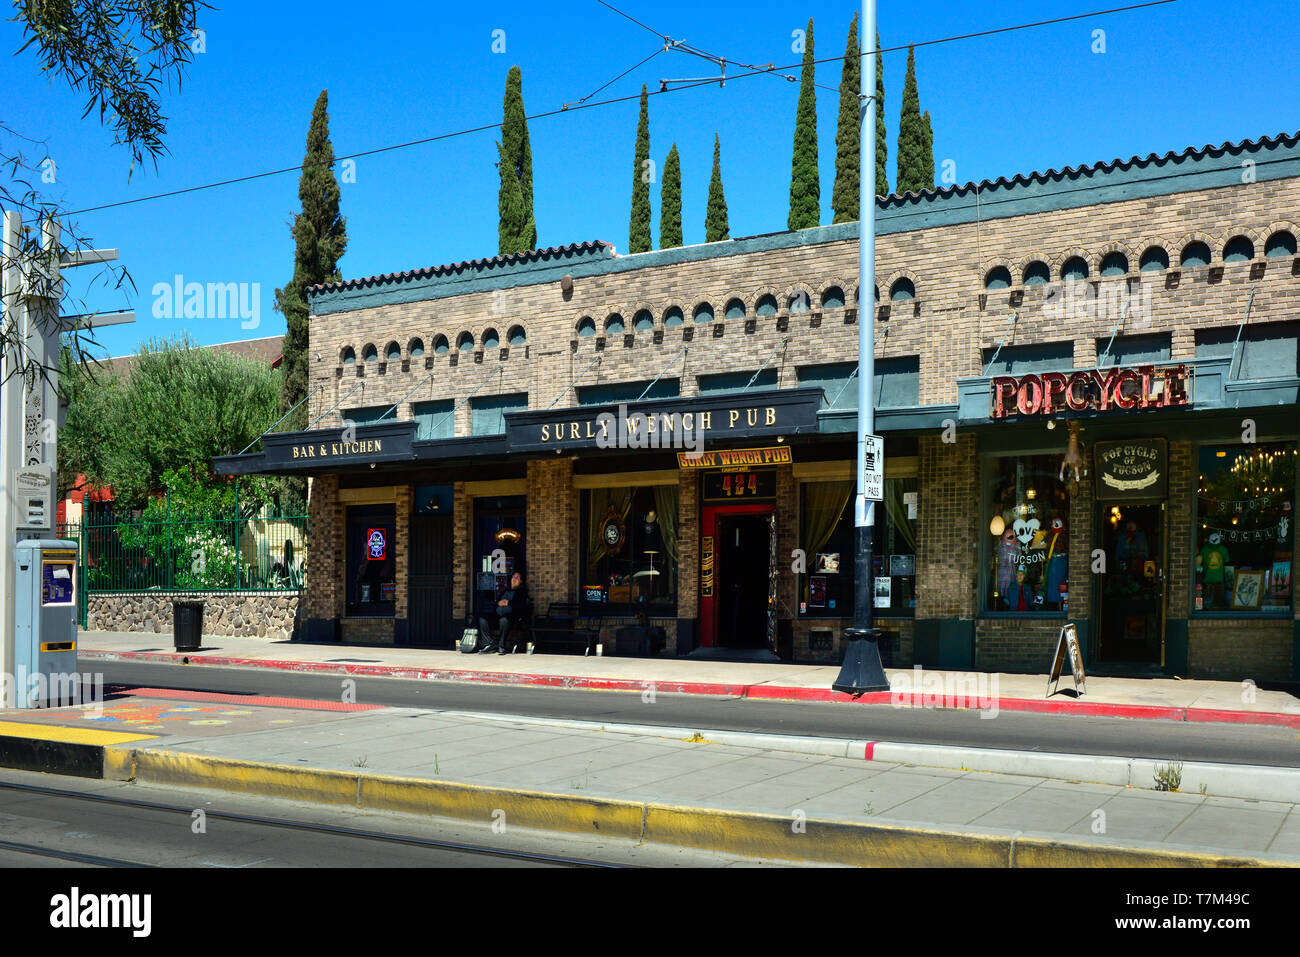 The Surly Wench Pub, popular for their music and pub fare, located alongside a streetcar stop, on historic 4th Avenue in Tucson, AZ Stock Photo